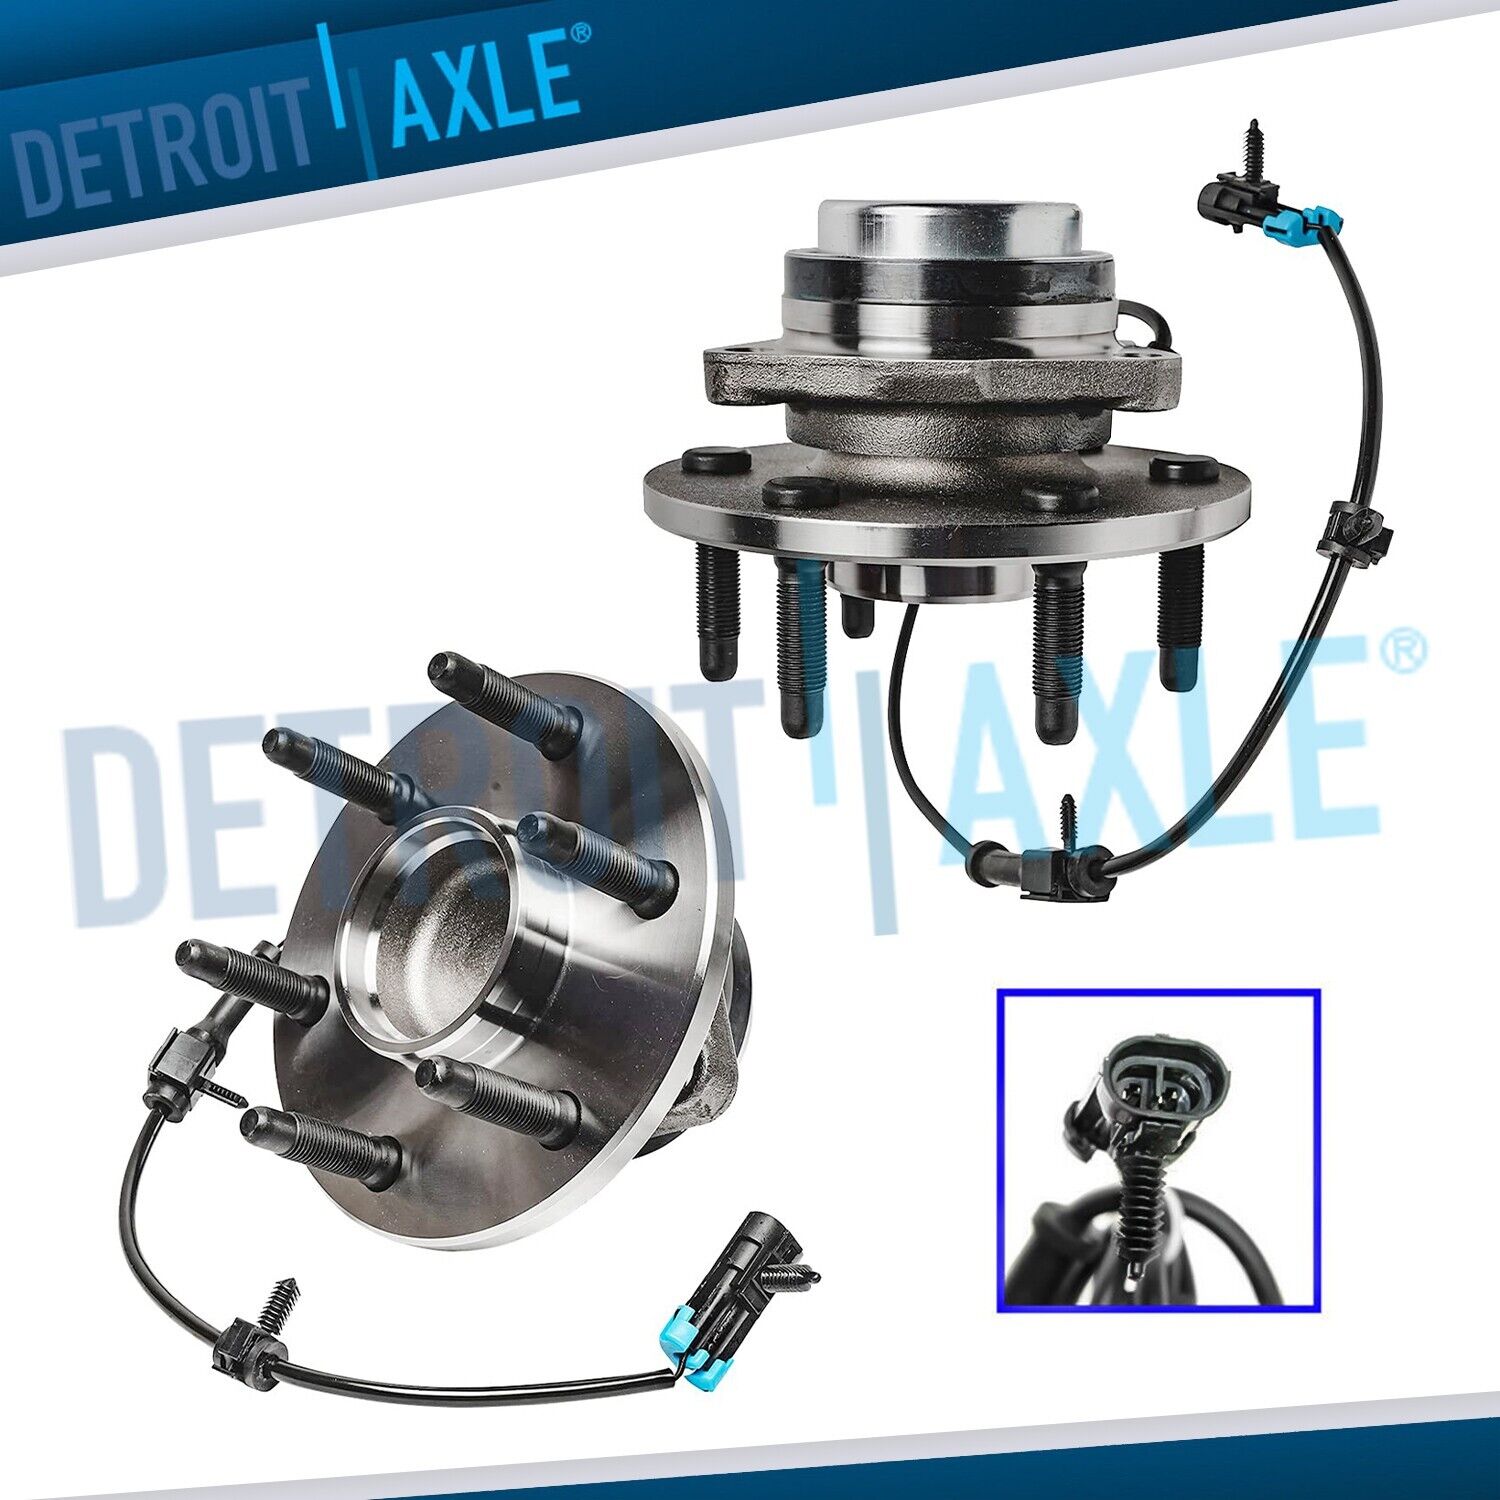 2WD Front Wheel Bearing and Hubs for Chevy GMC Suburban Avalanche Yukon XL 1500